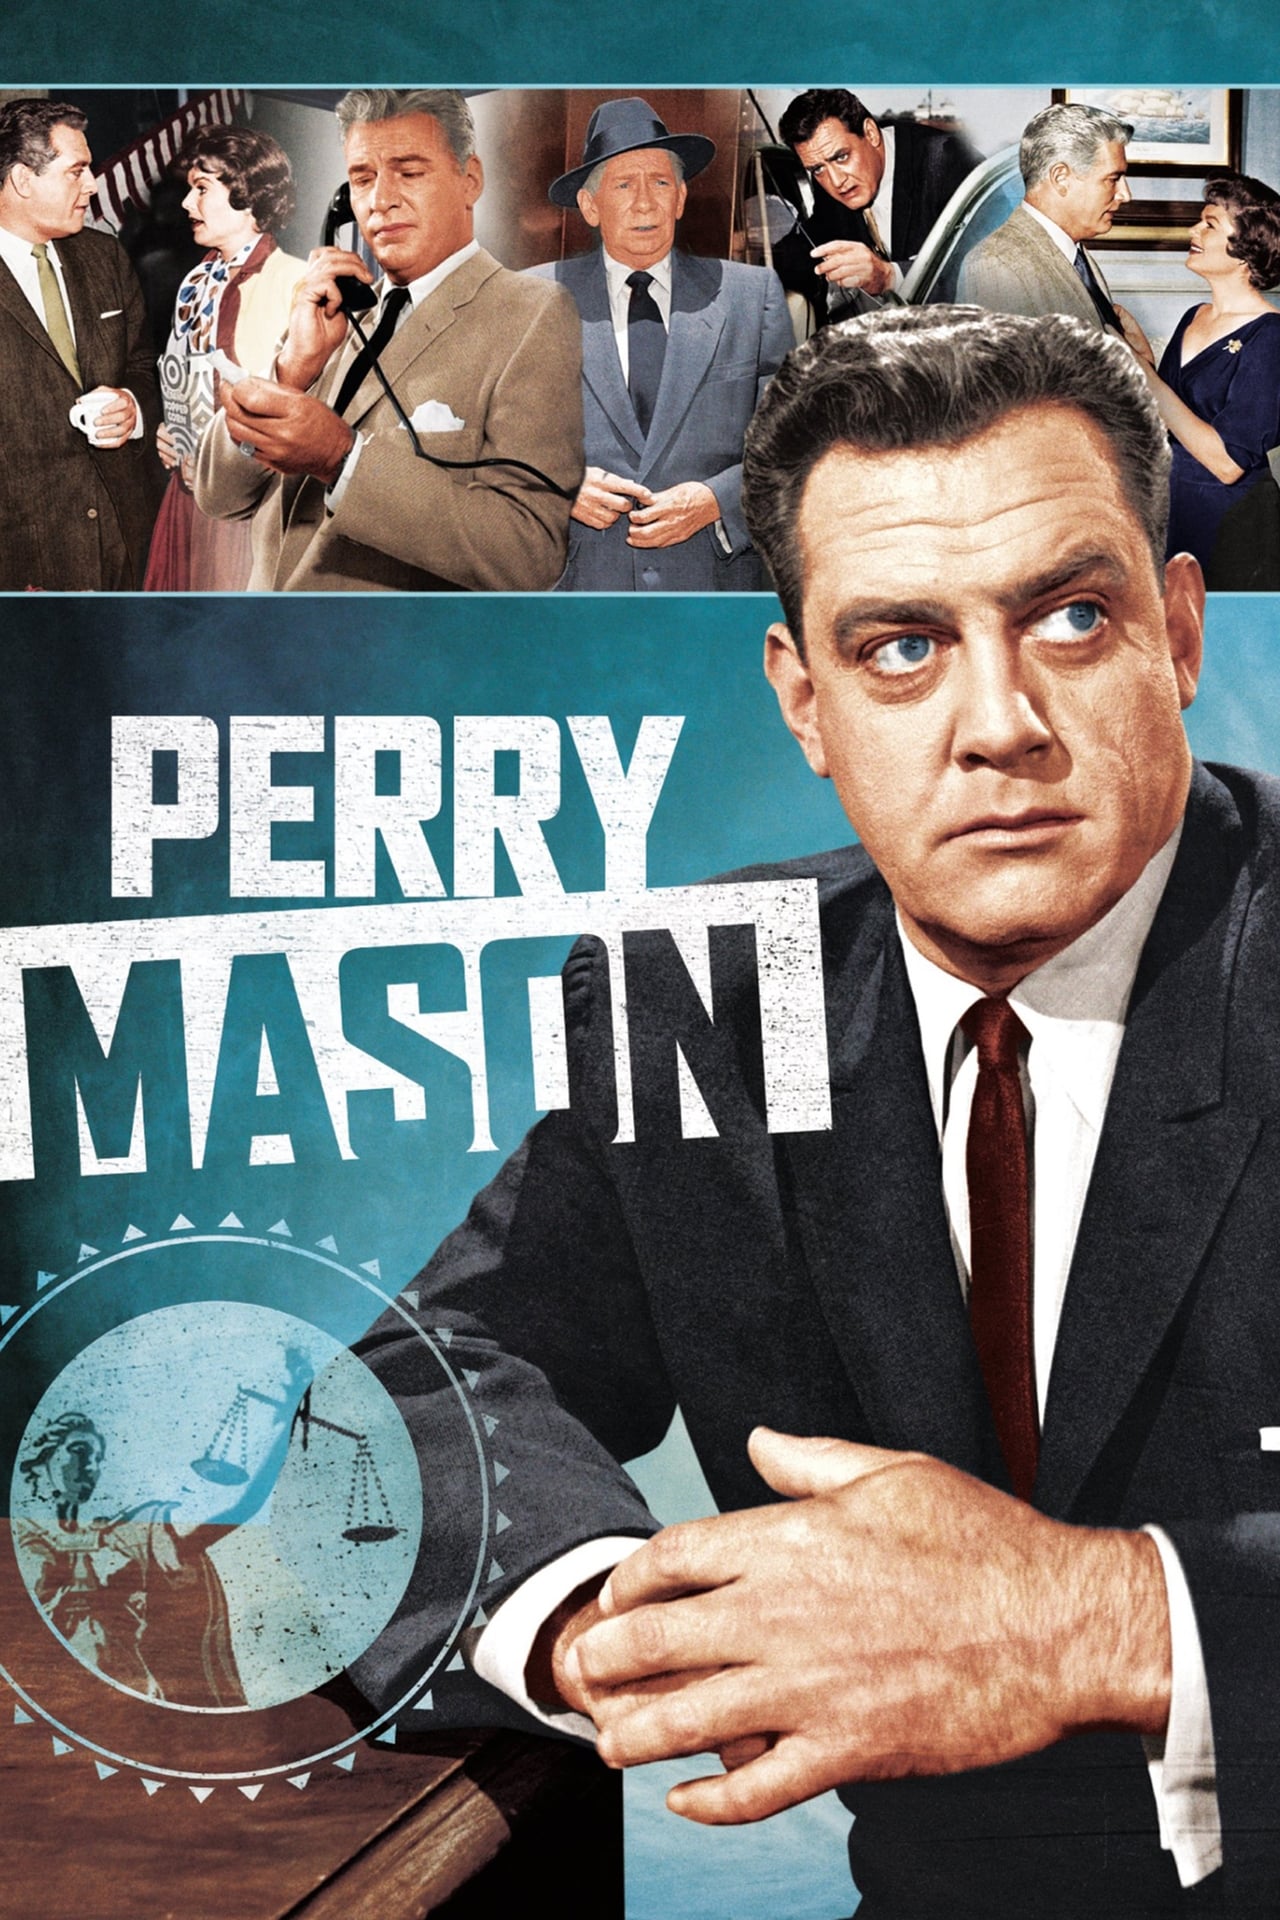 Perry Mason, Season 1 release date, trailers, cast, synopsis and reviews